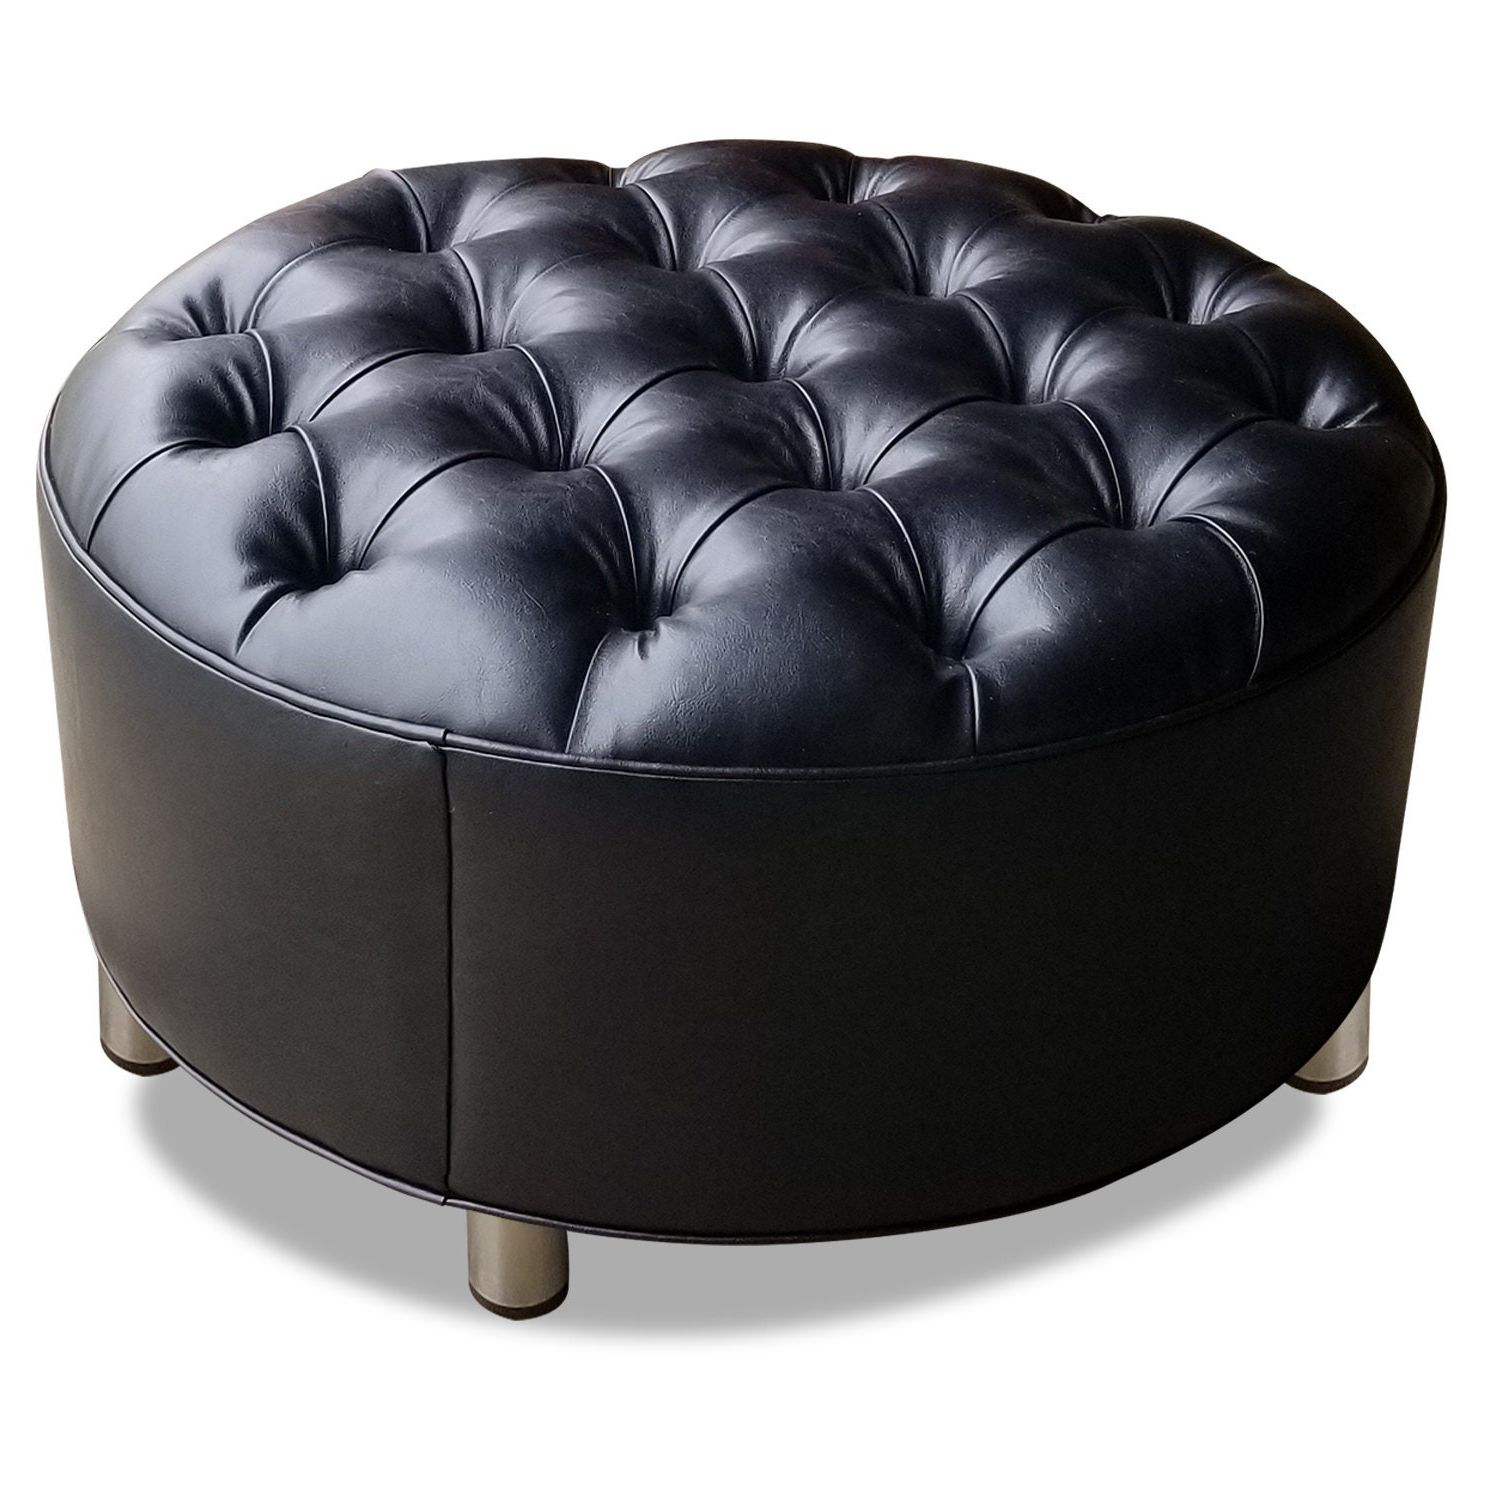 Most Up To Date Modern Round Ottoman, Tufted, Black Vegan Leather, Chrome Metal Legs Inside Brown Faux Leather Tufted Round Wood Ottomans (View 1 of 10)